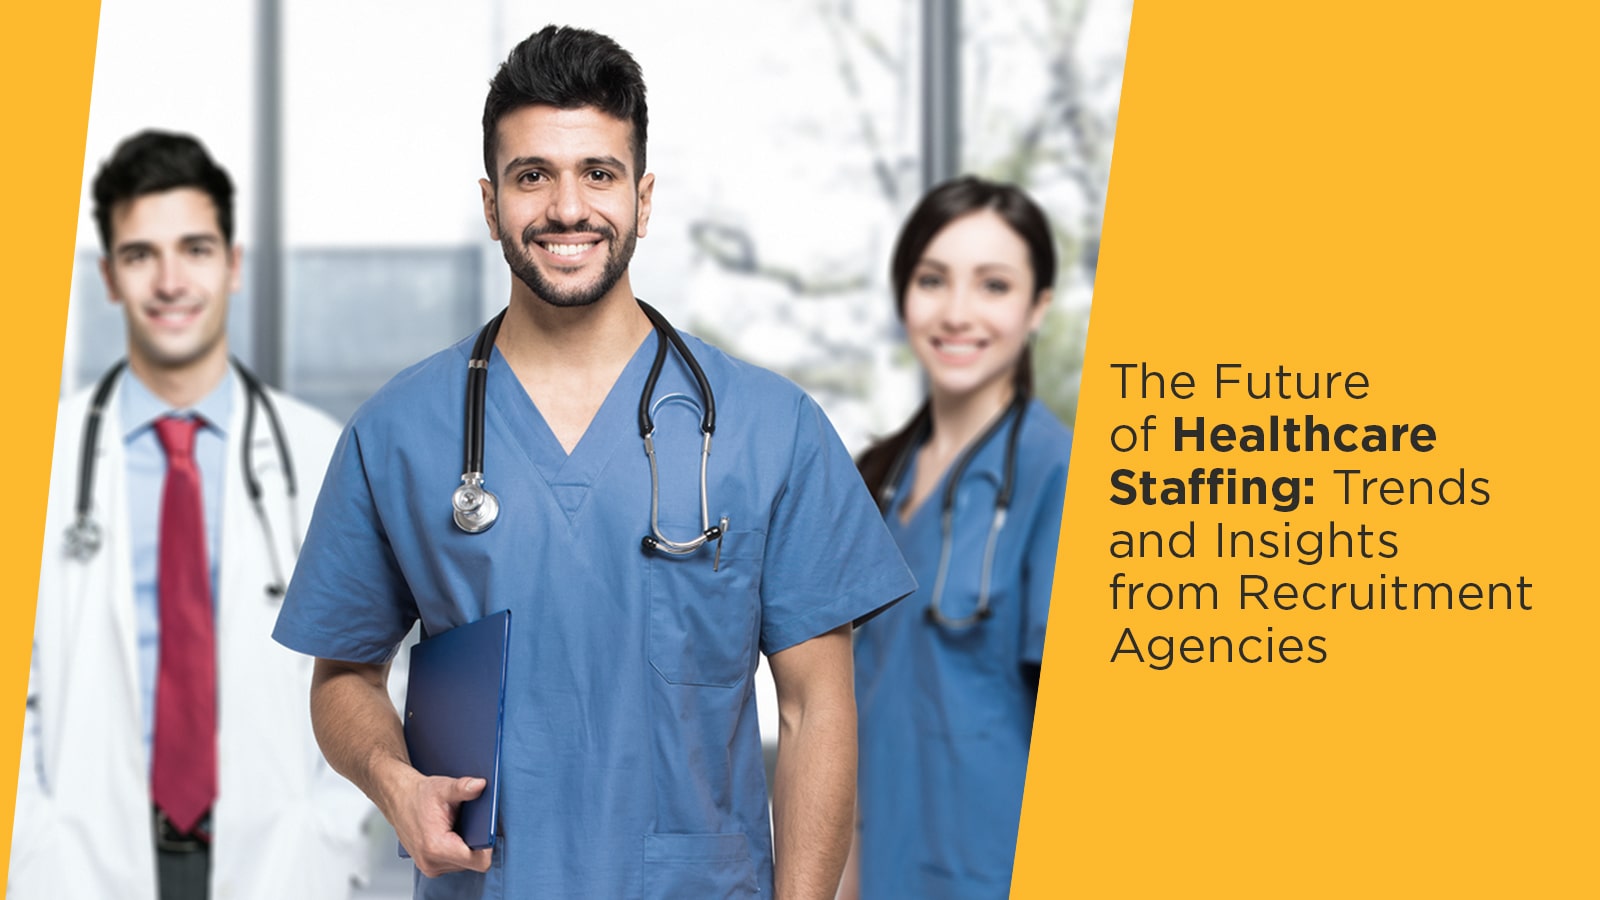 The Future of Healthcare Staffing Trends and Insights